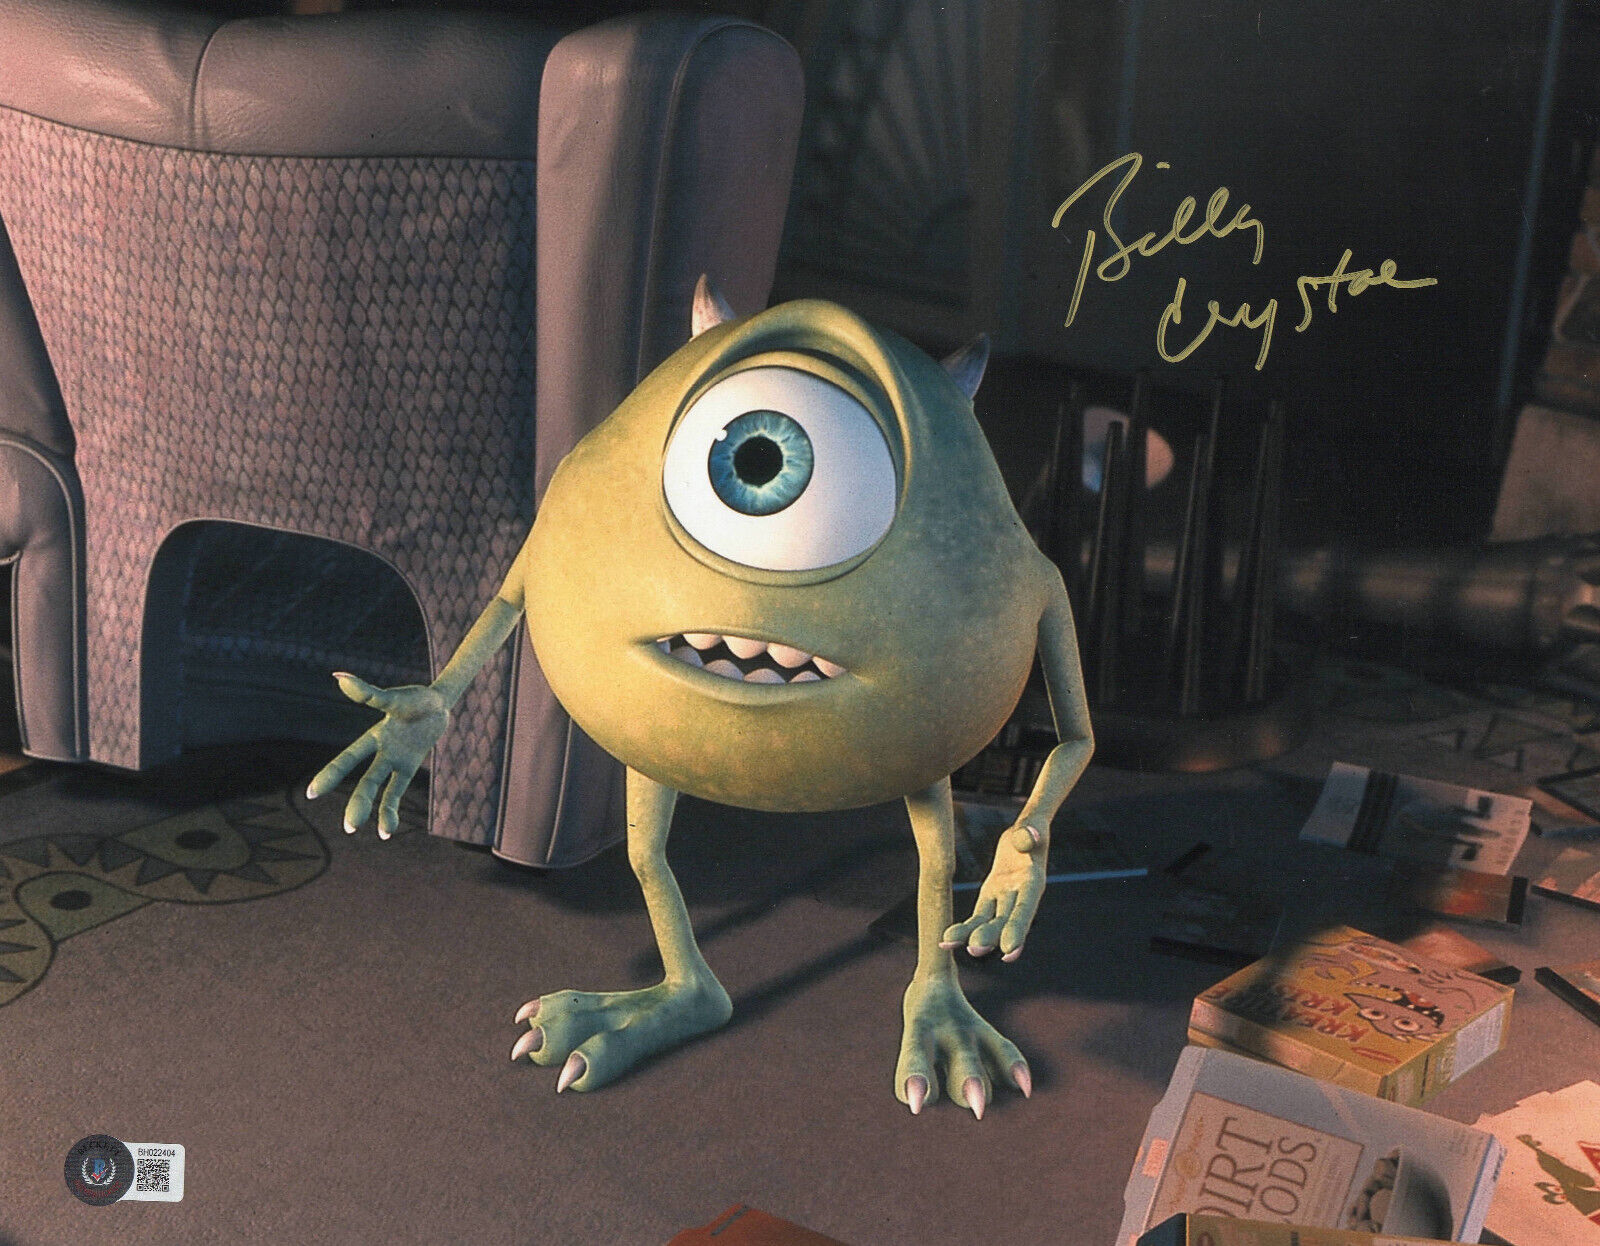 BILLY CRYSTAL SIGNED MONSTERS INC AUTOGRAPH 11X14 PHOTO BAS BECKETT COA